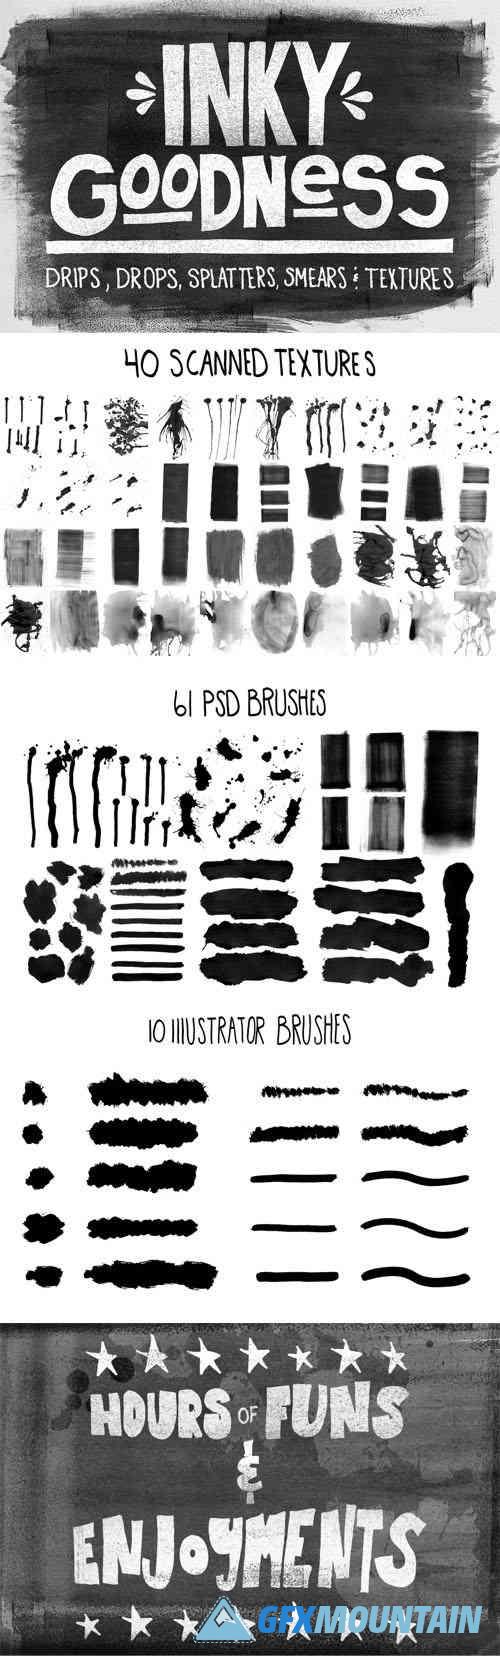 Inky Goodness Brushes for Photoshop & Illustrator + Textures